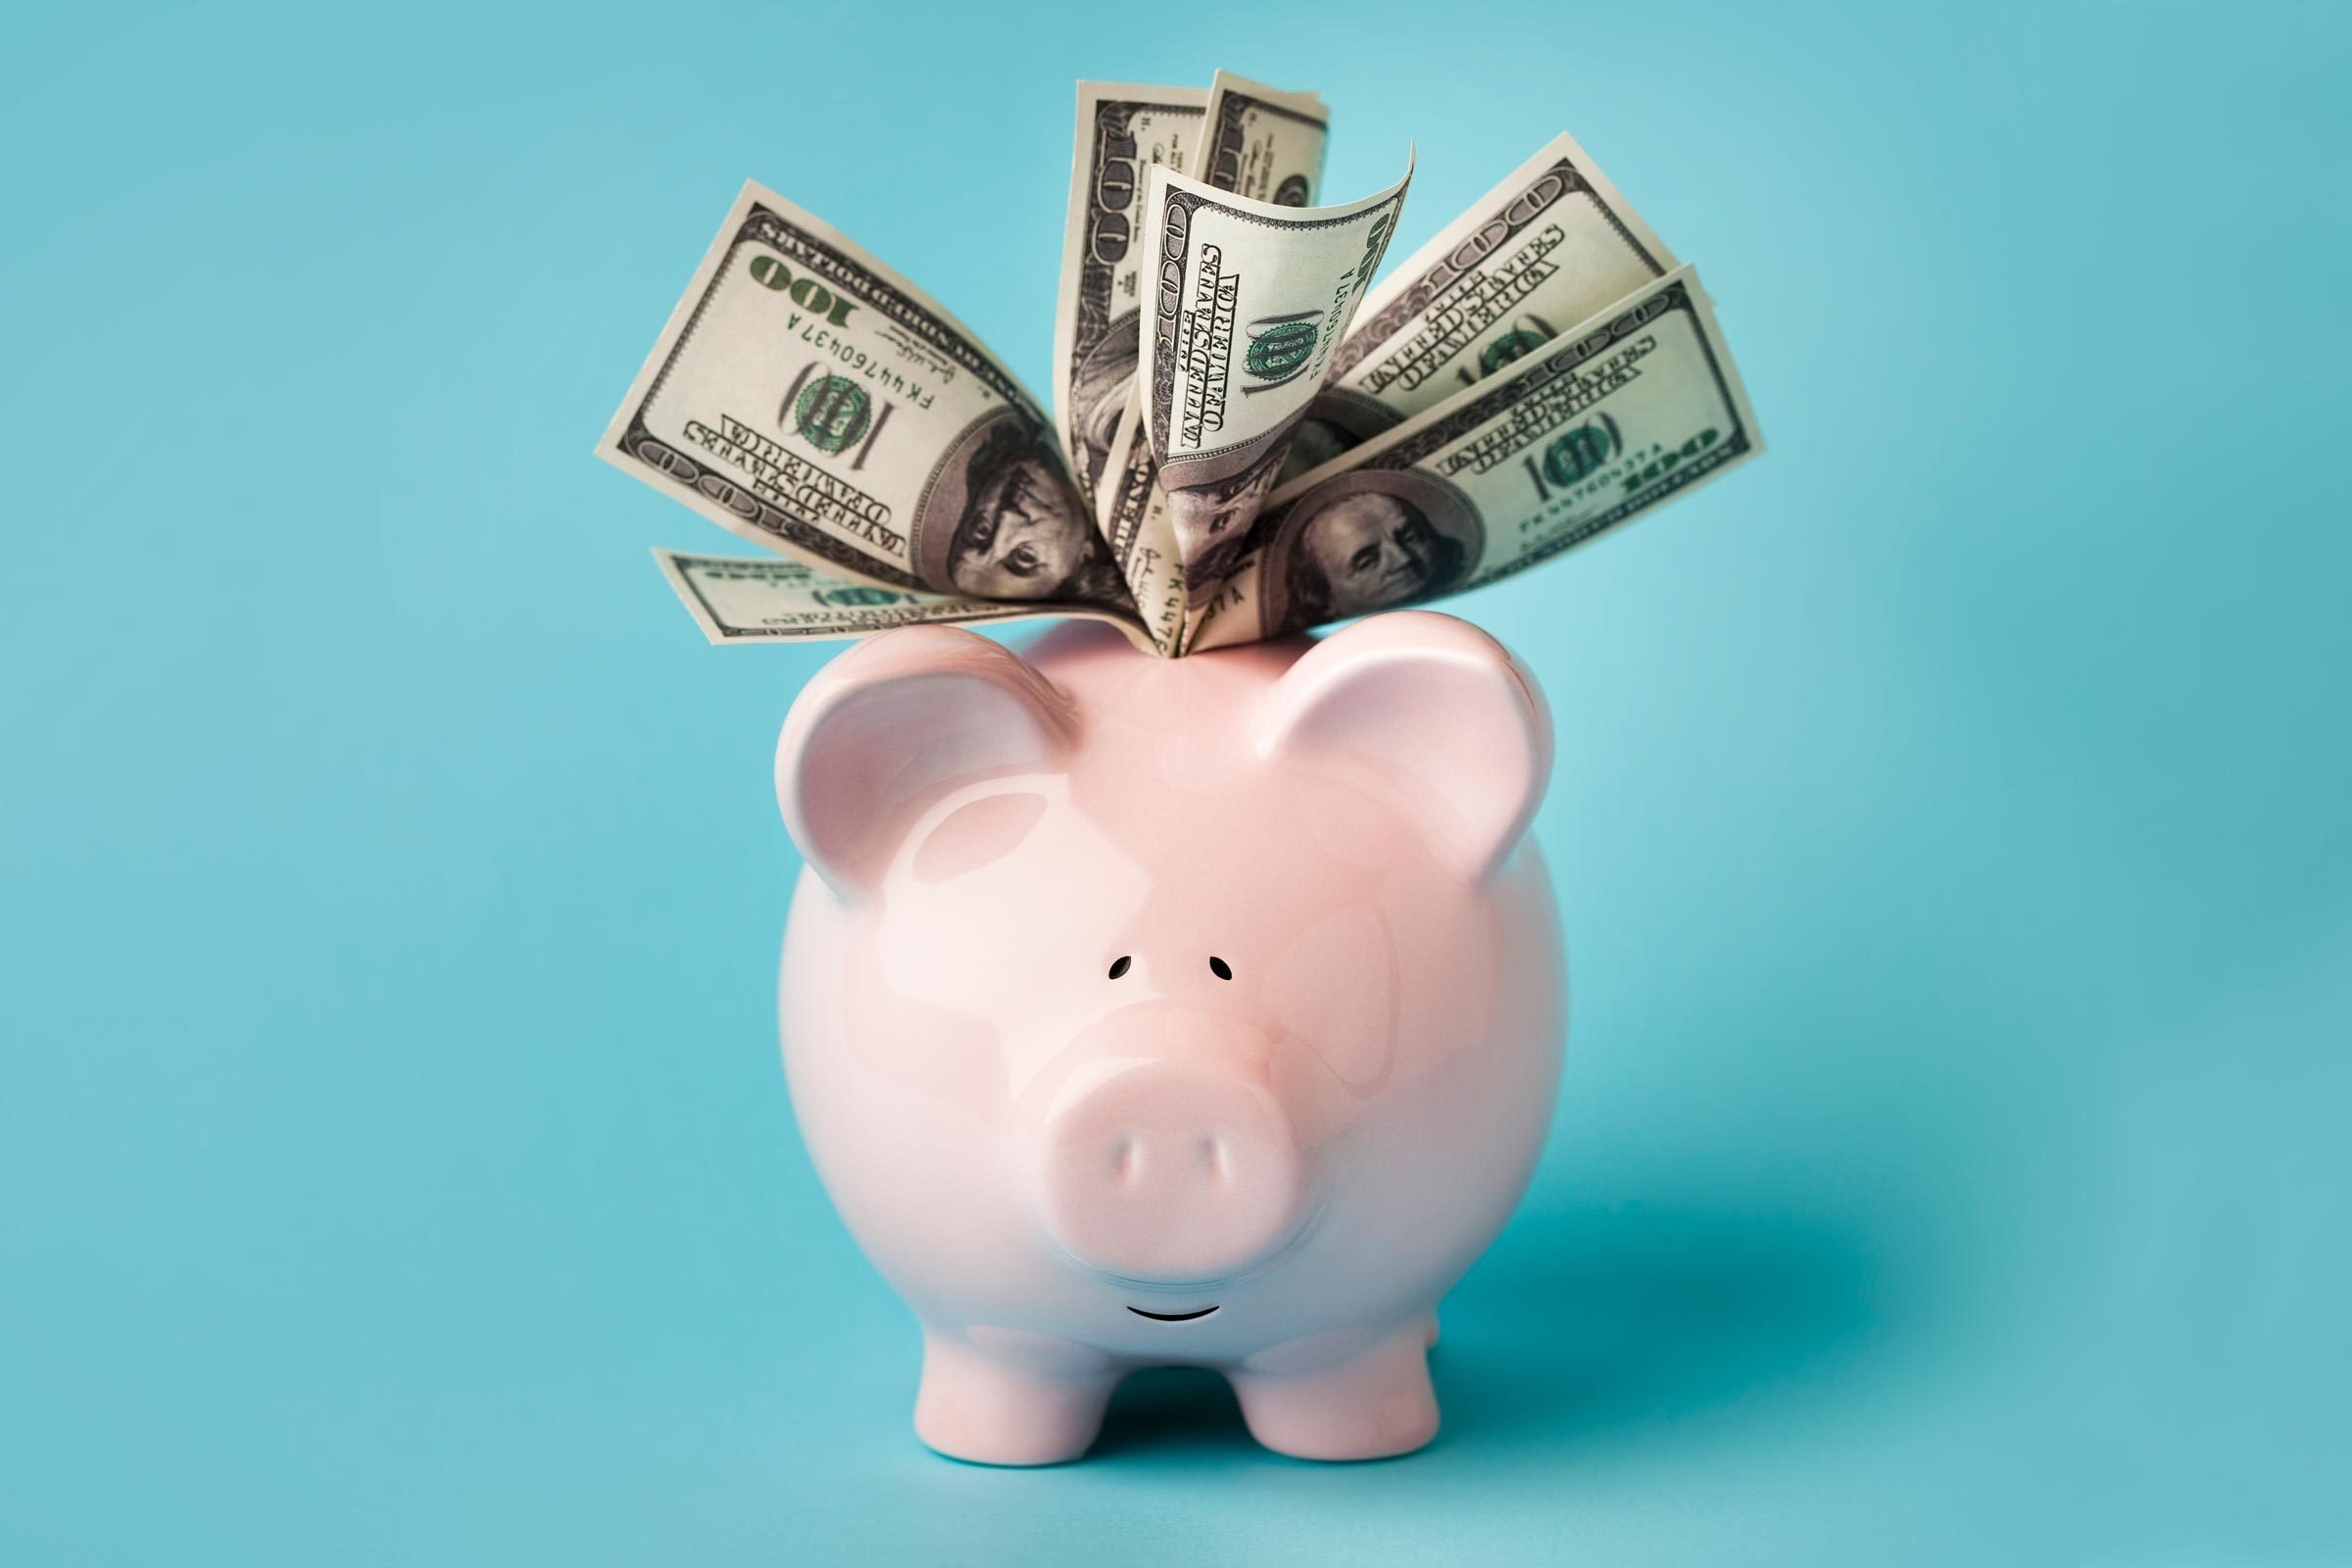 piggy bank with hundred dollar bills sticking out on blue background